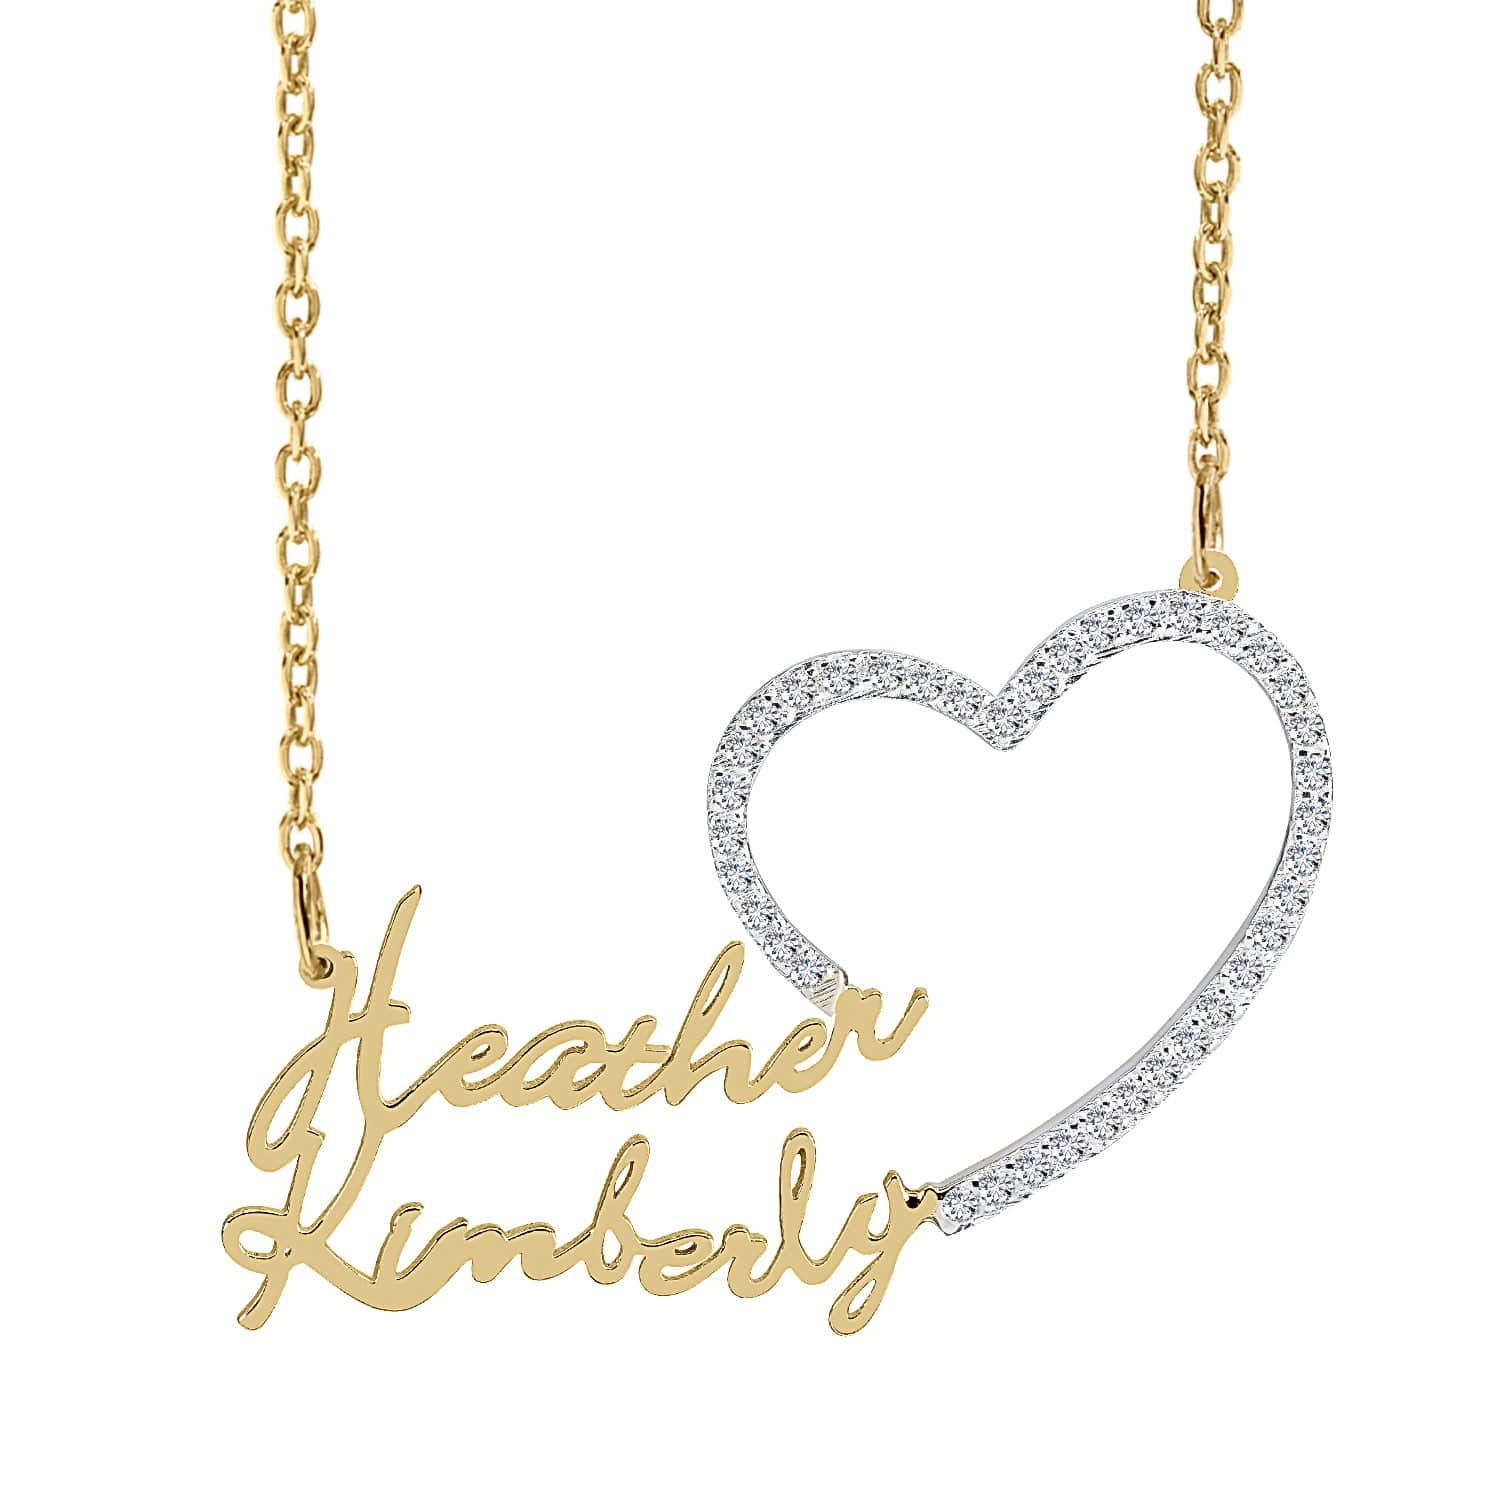 14k Gold over Sterling Silver / Link Chain Copy of Single Plated Nameplate Necklace "Heather" with Stones Heart